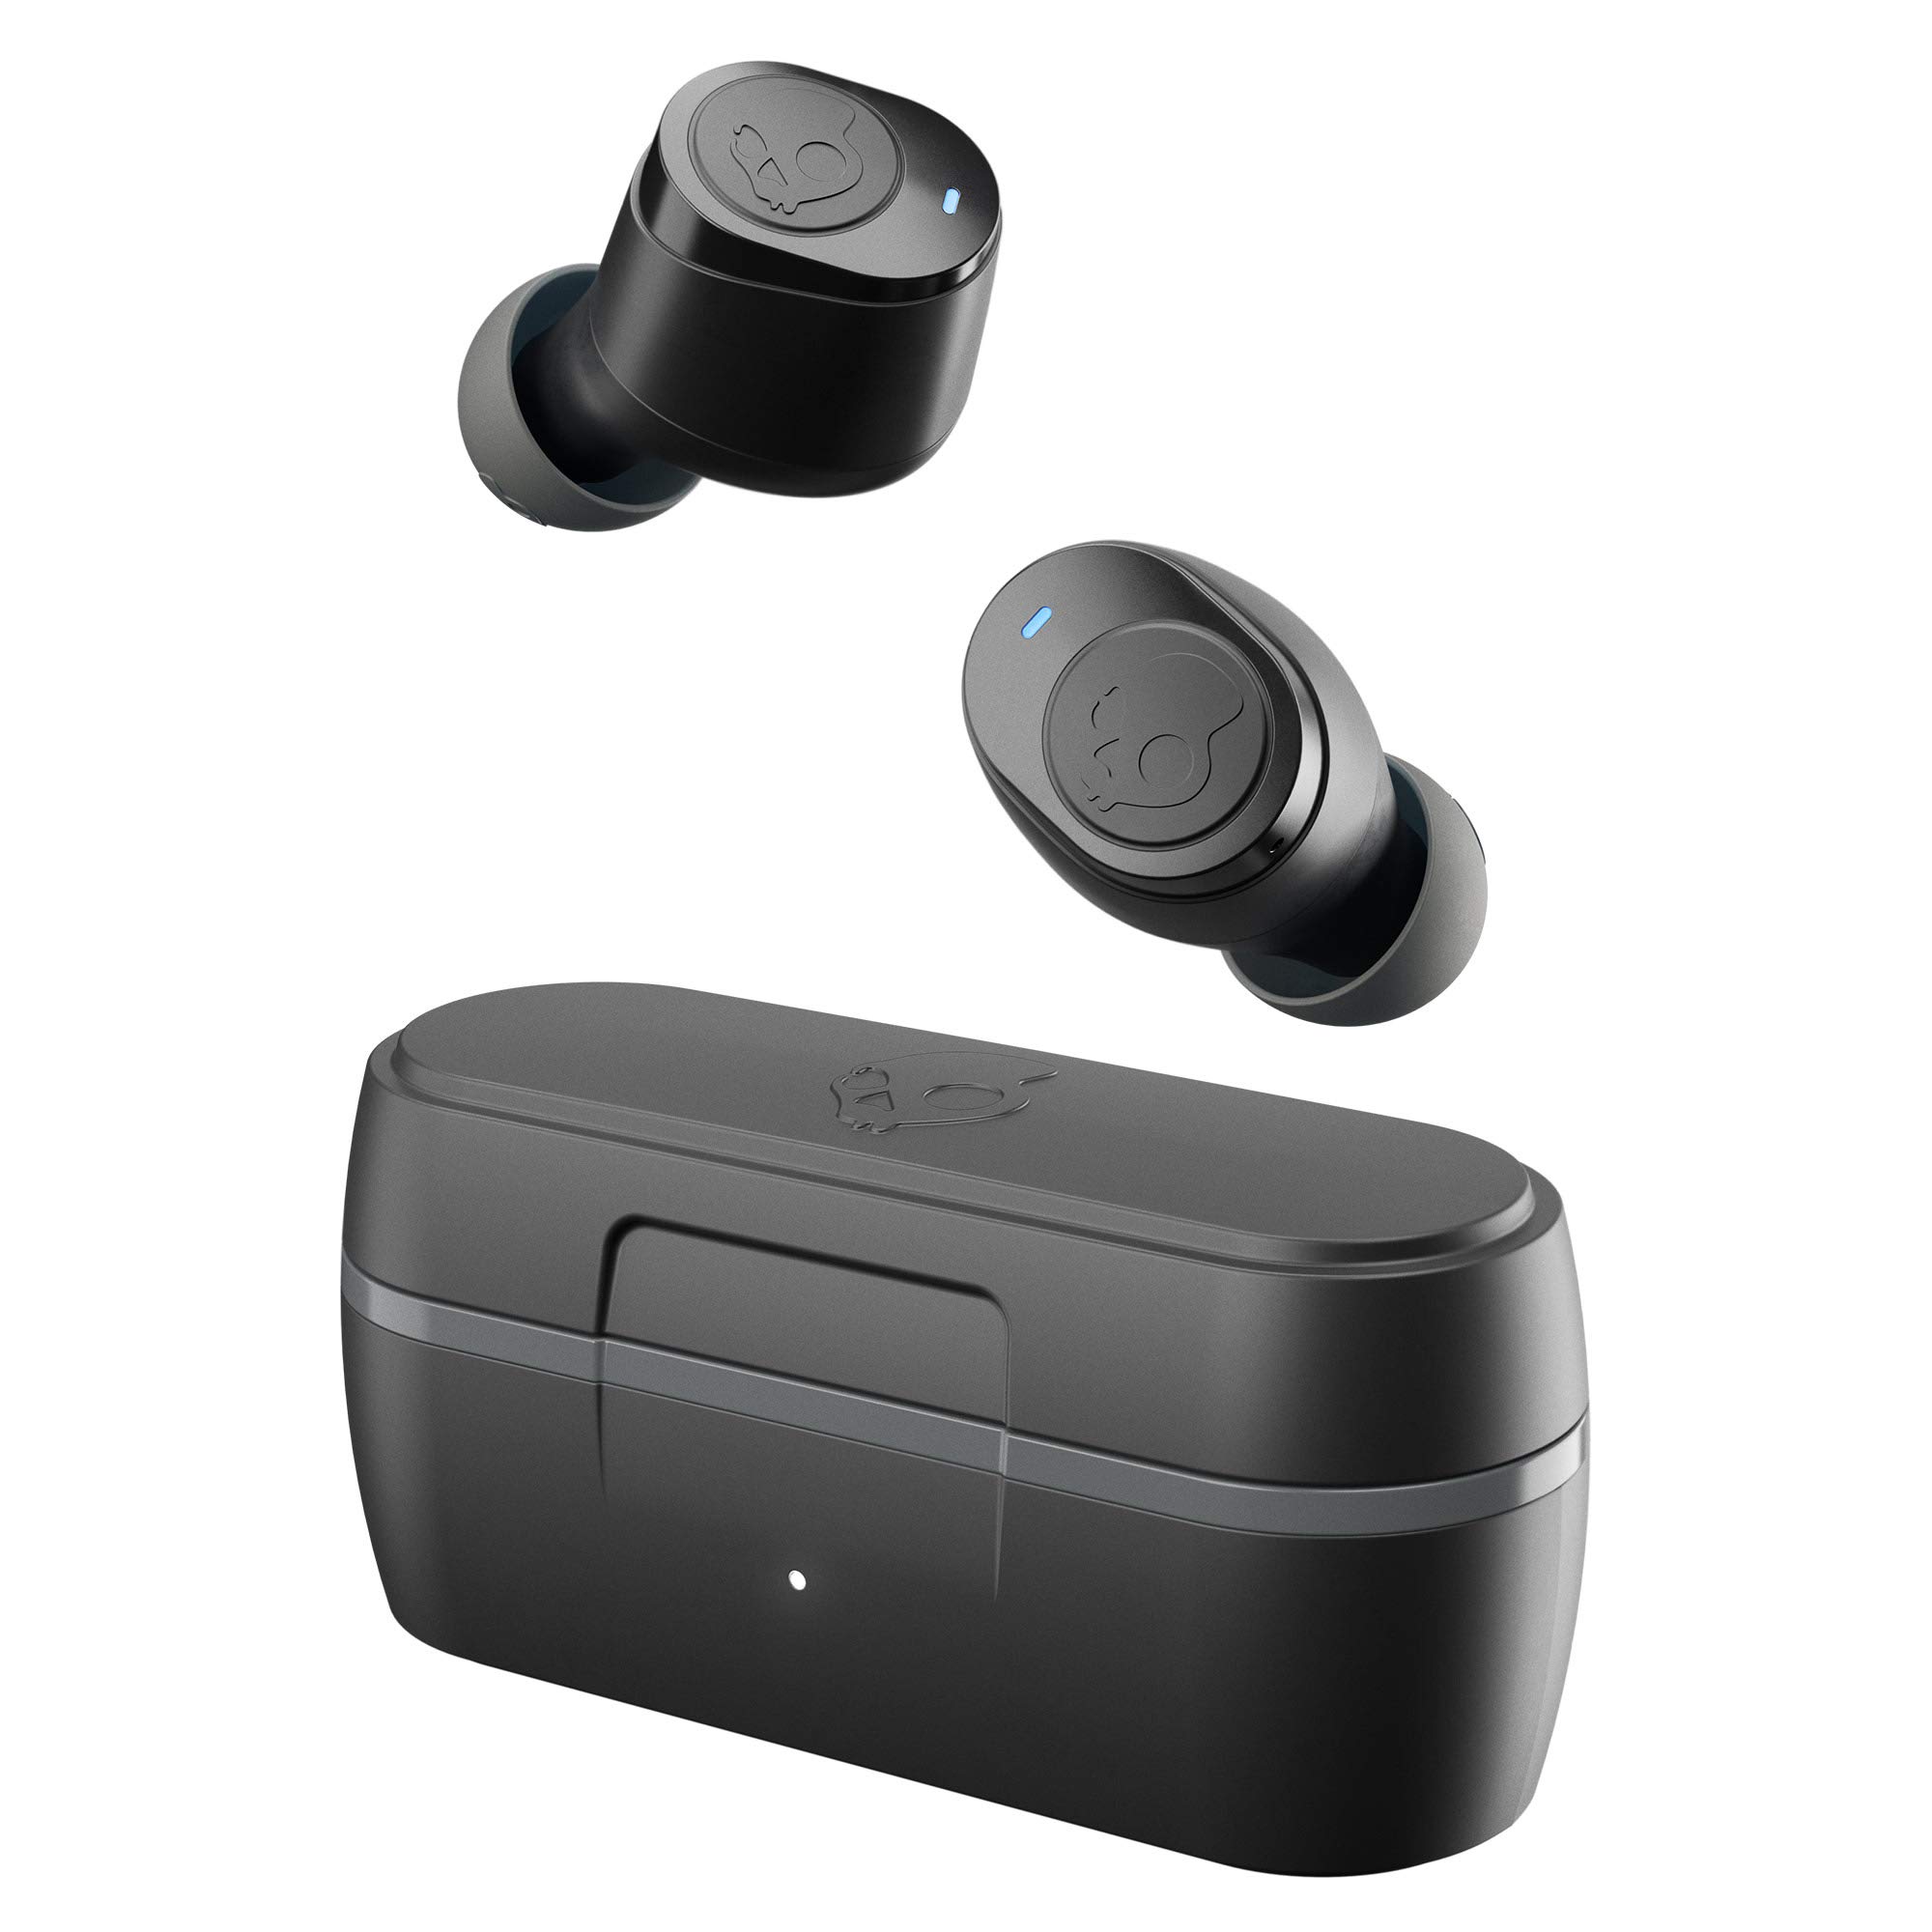 Skullcandy Jib True Wireless Earbud with Microphone / 22 Hour Battery Life / Use with iPhone and Android / Best for Gym, and Gaming / Bluetooth Earbud Headphones - Black